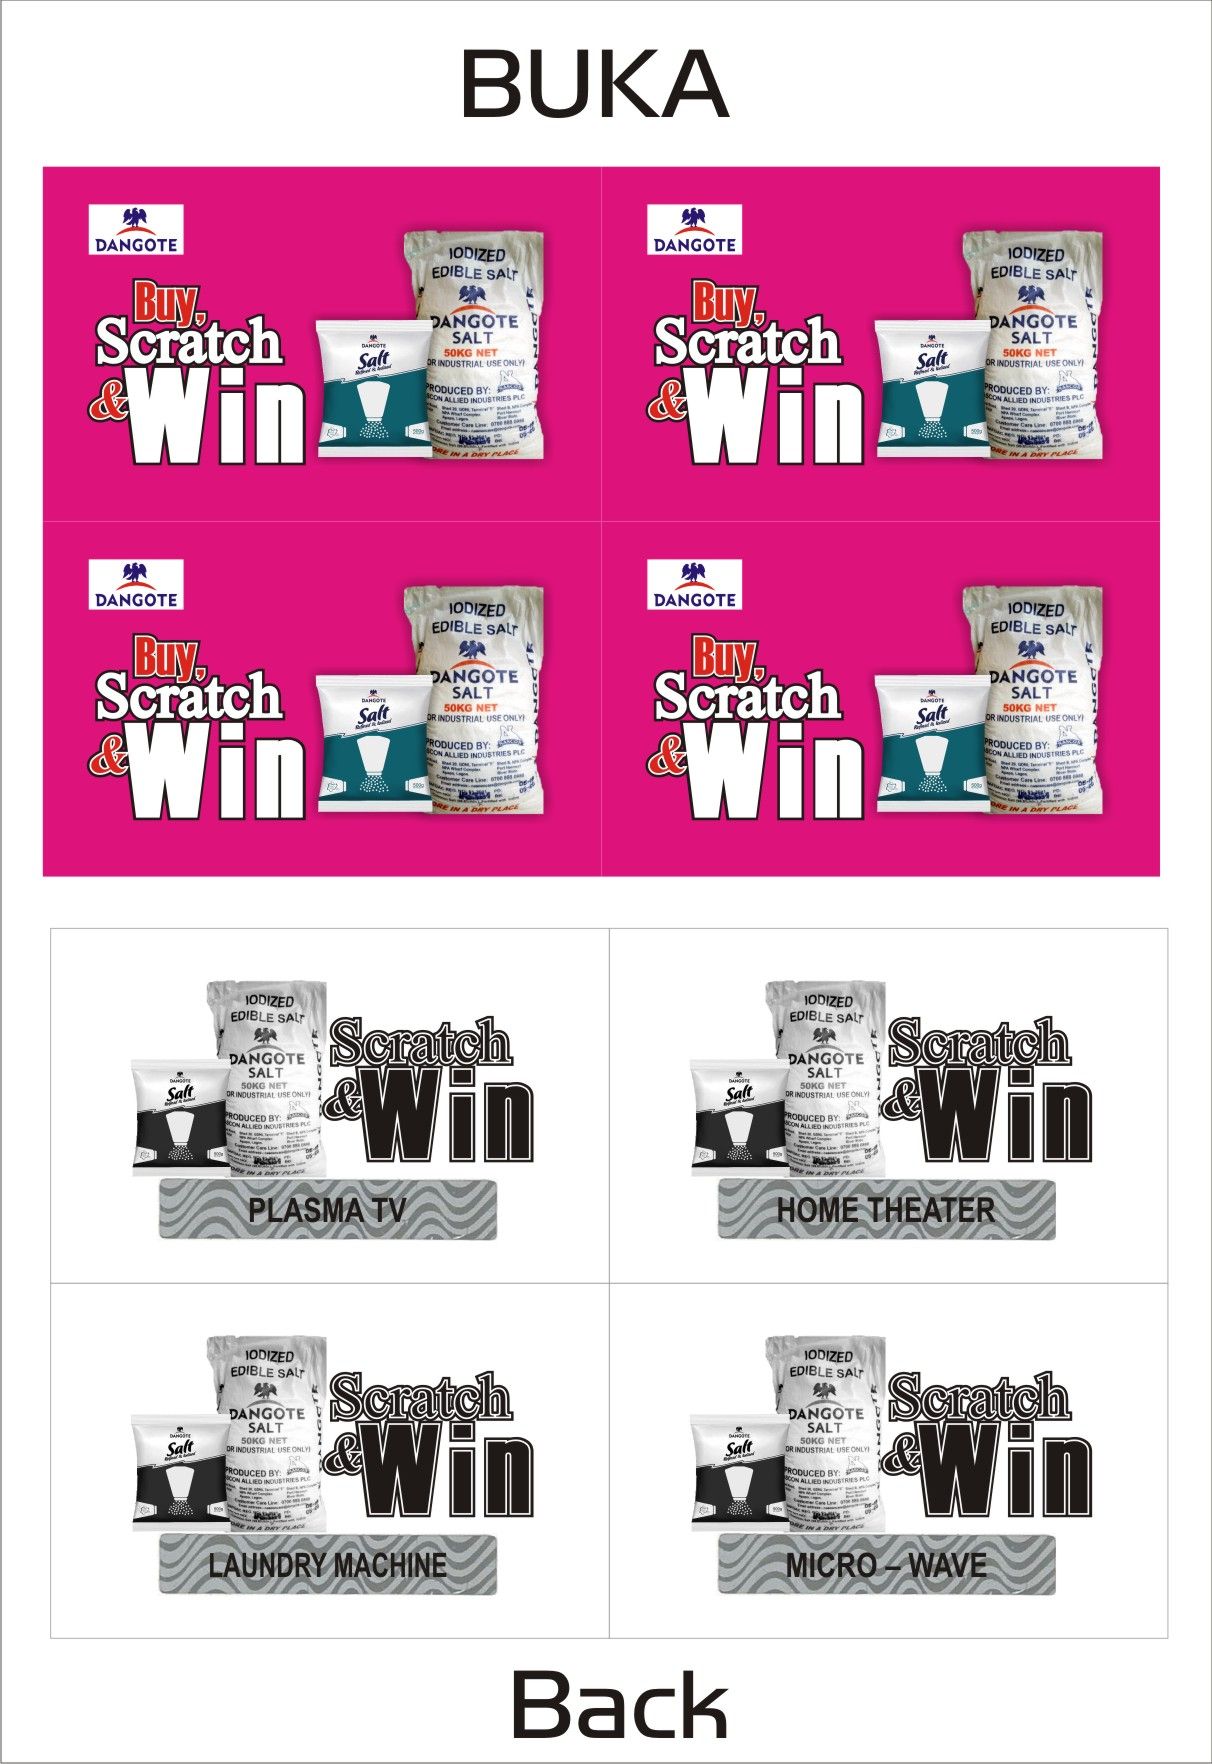 REWARD YOUR CUSTOMERS IN A SCRATCH & WIN PROMO CALL CHINEDU ON 08179651585 TO PRINT SCRATCH & WIN PROMO CARDS